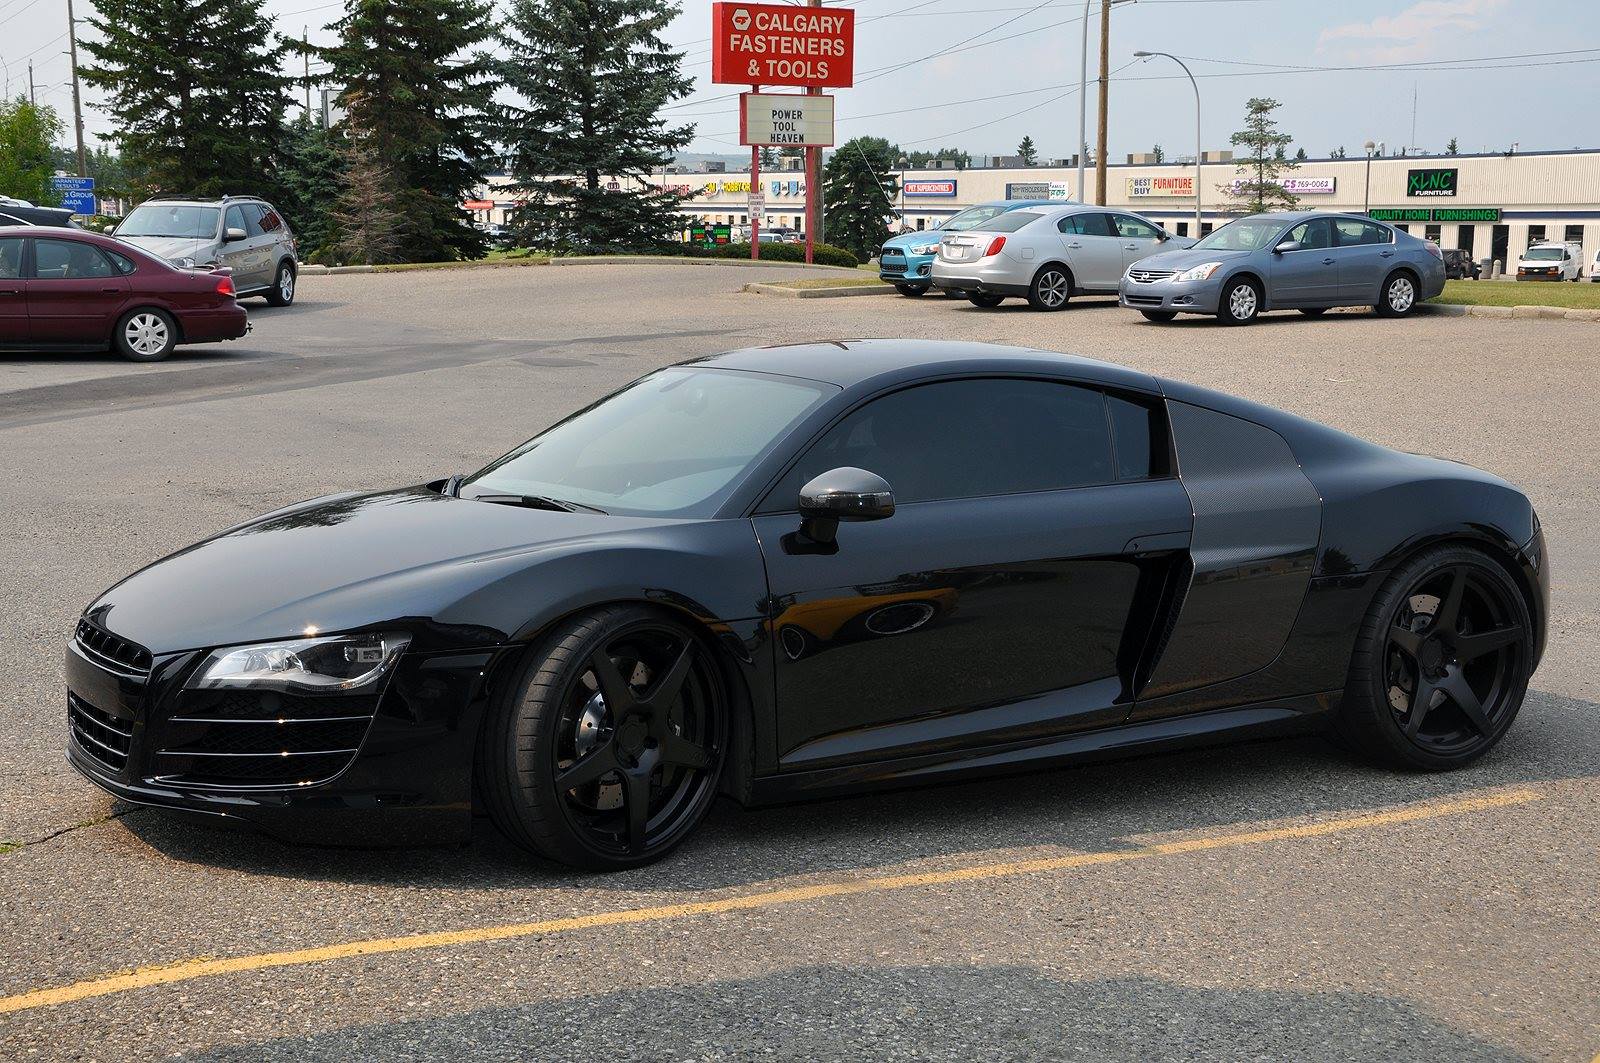 Does it get much cooler than a blacked-out Audi R8?